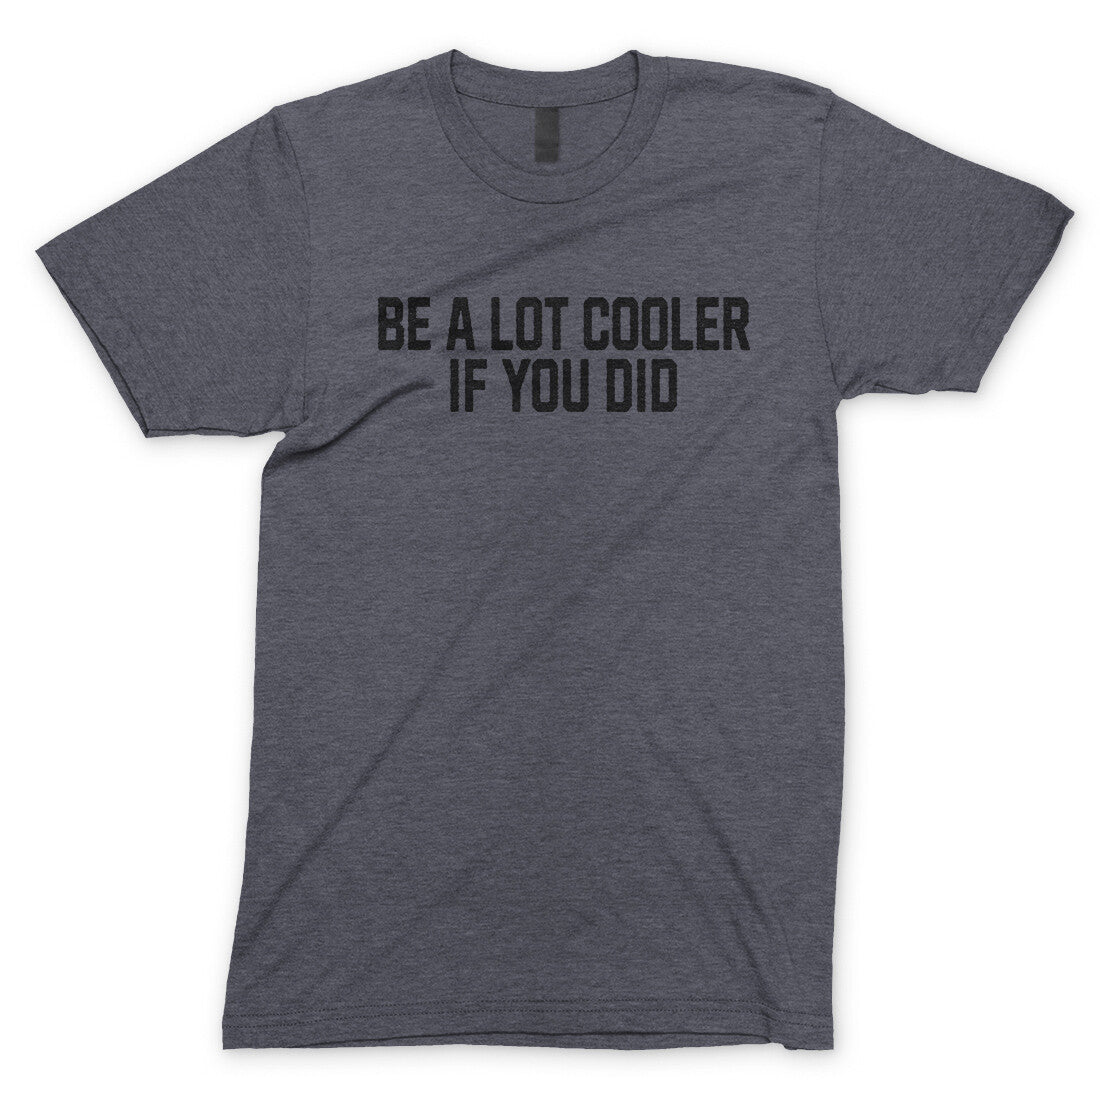 Be a Lot Cooler if you Did in Dark Heather Color